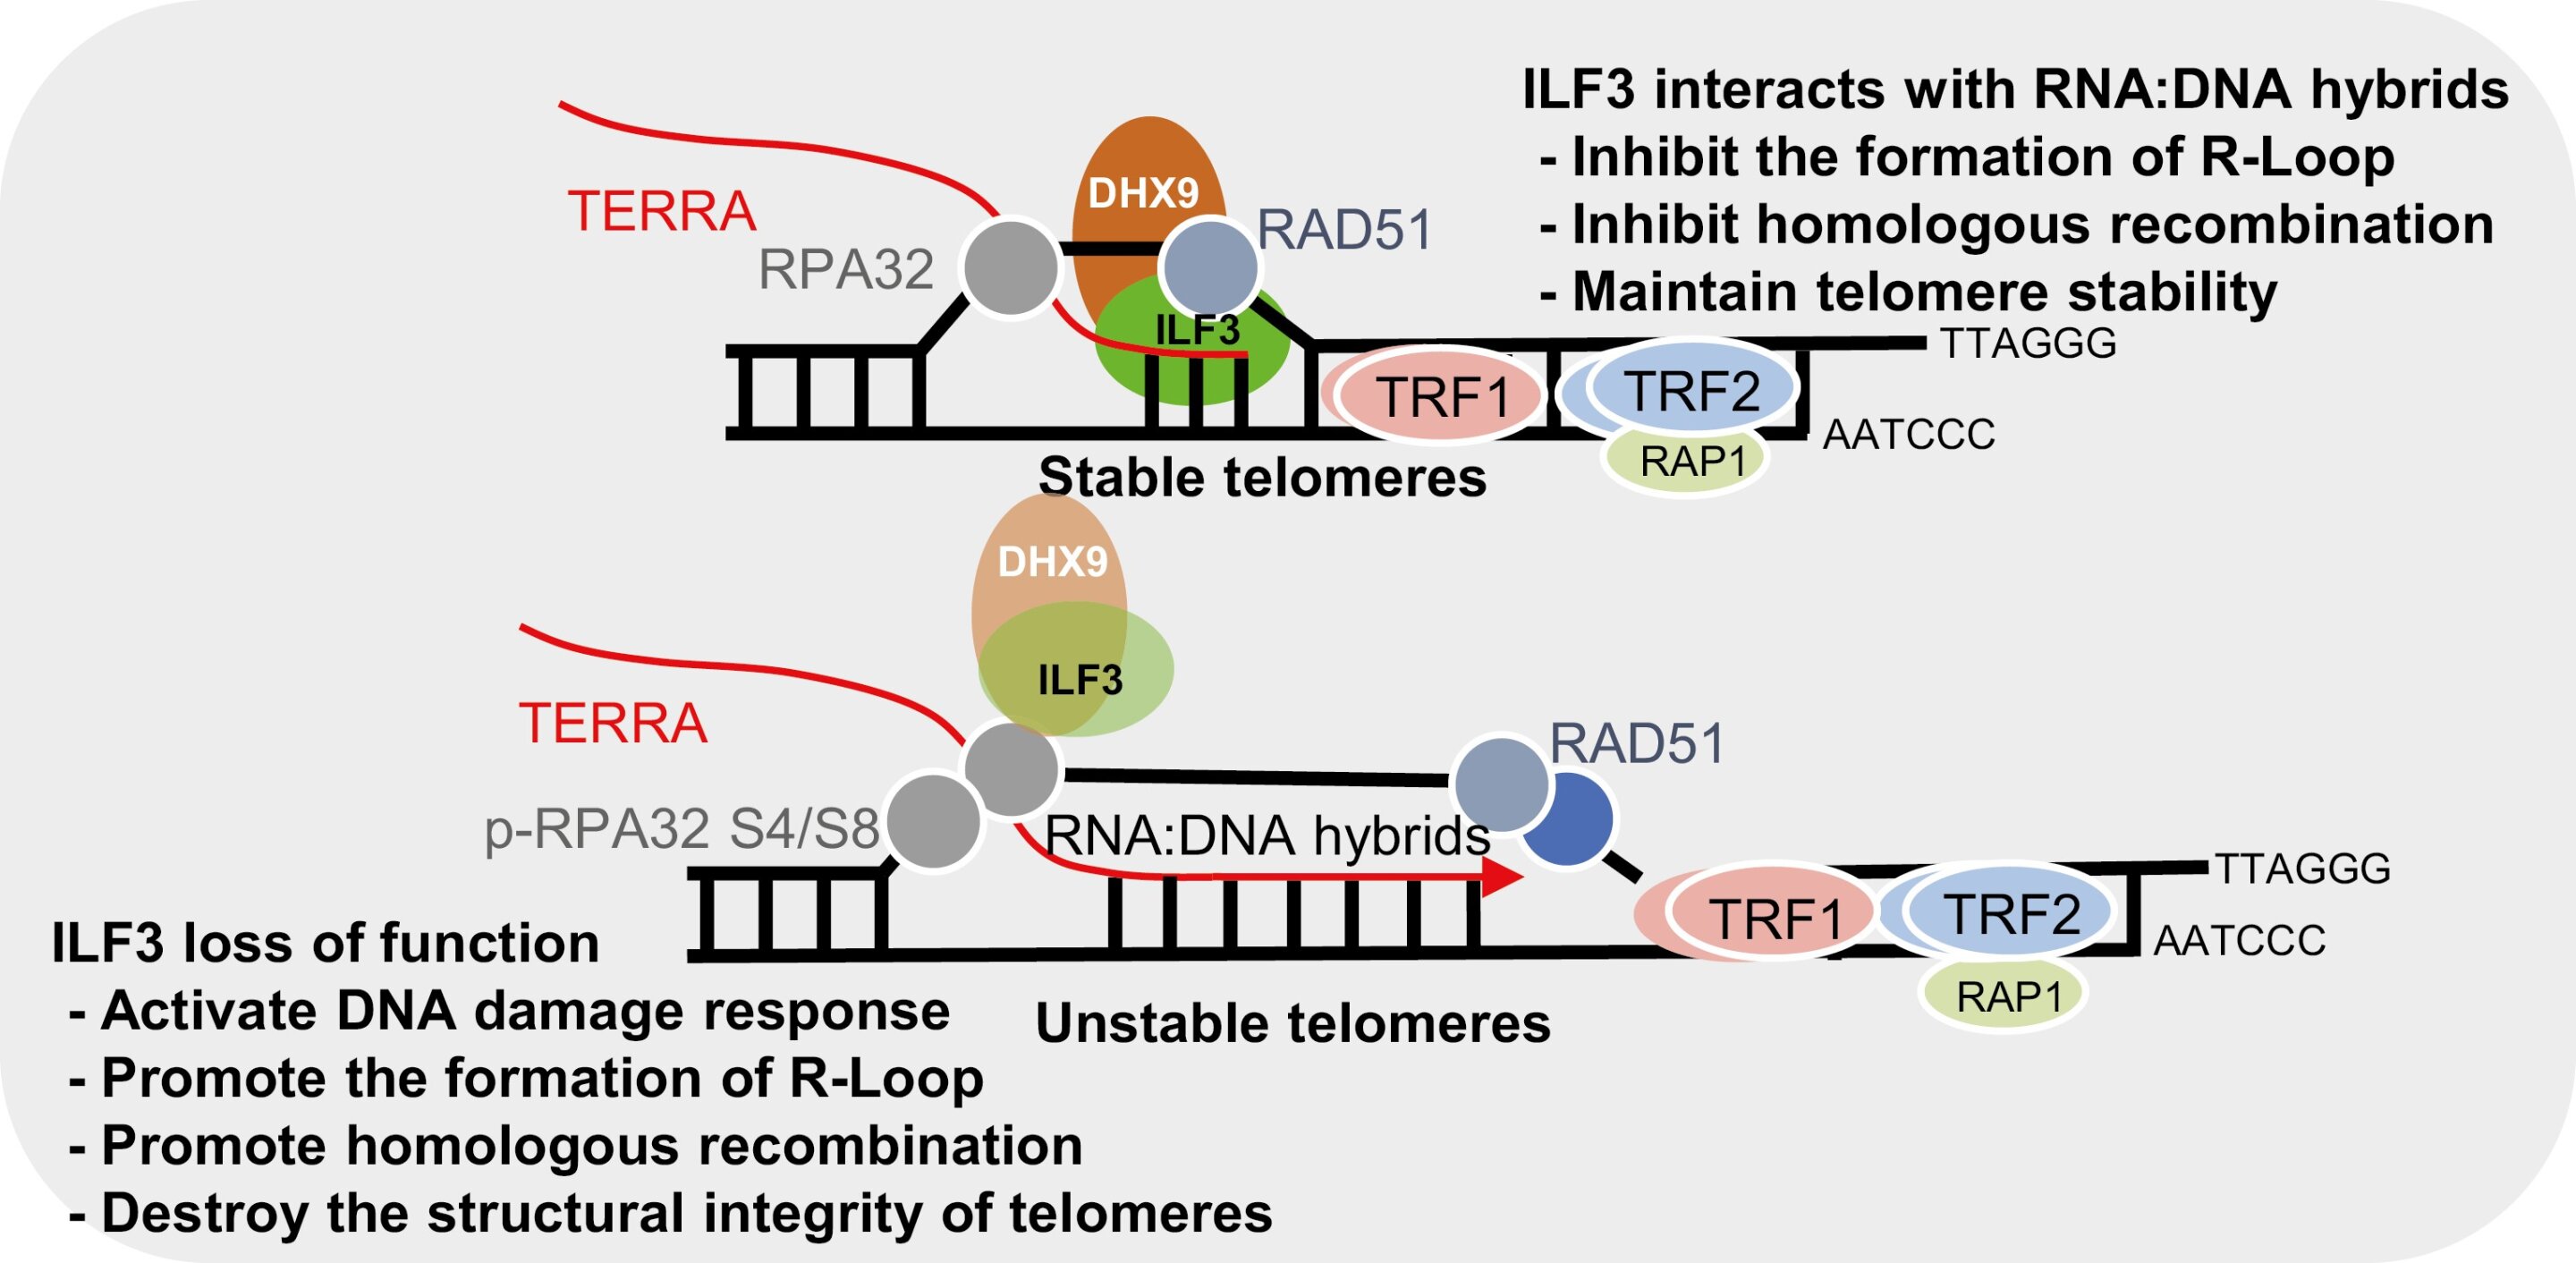 Findings suggest ILF3 may function as a reader of telomeric R-loops to help maintain telomere homeostasis